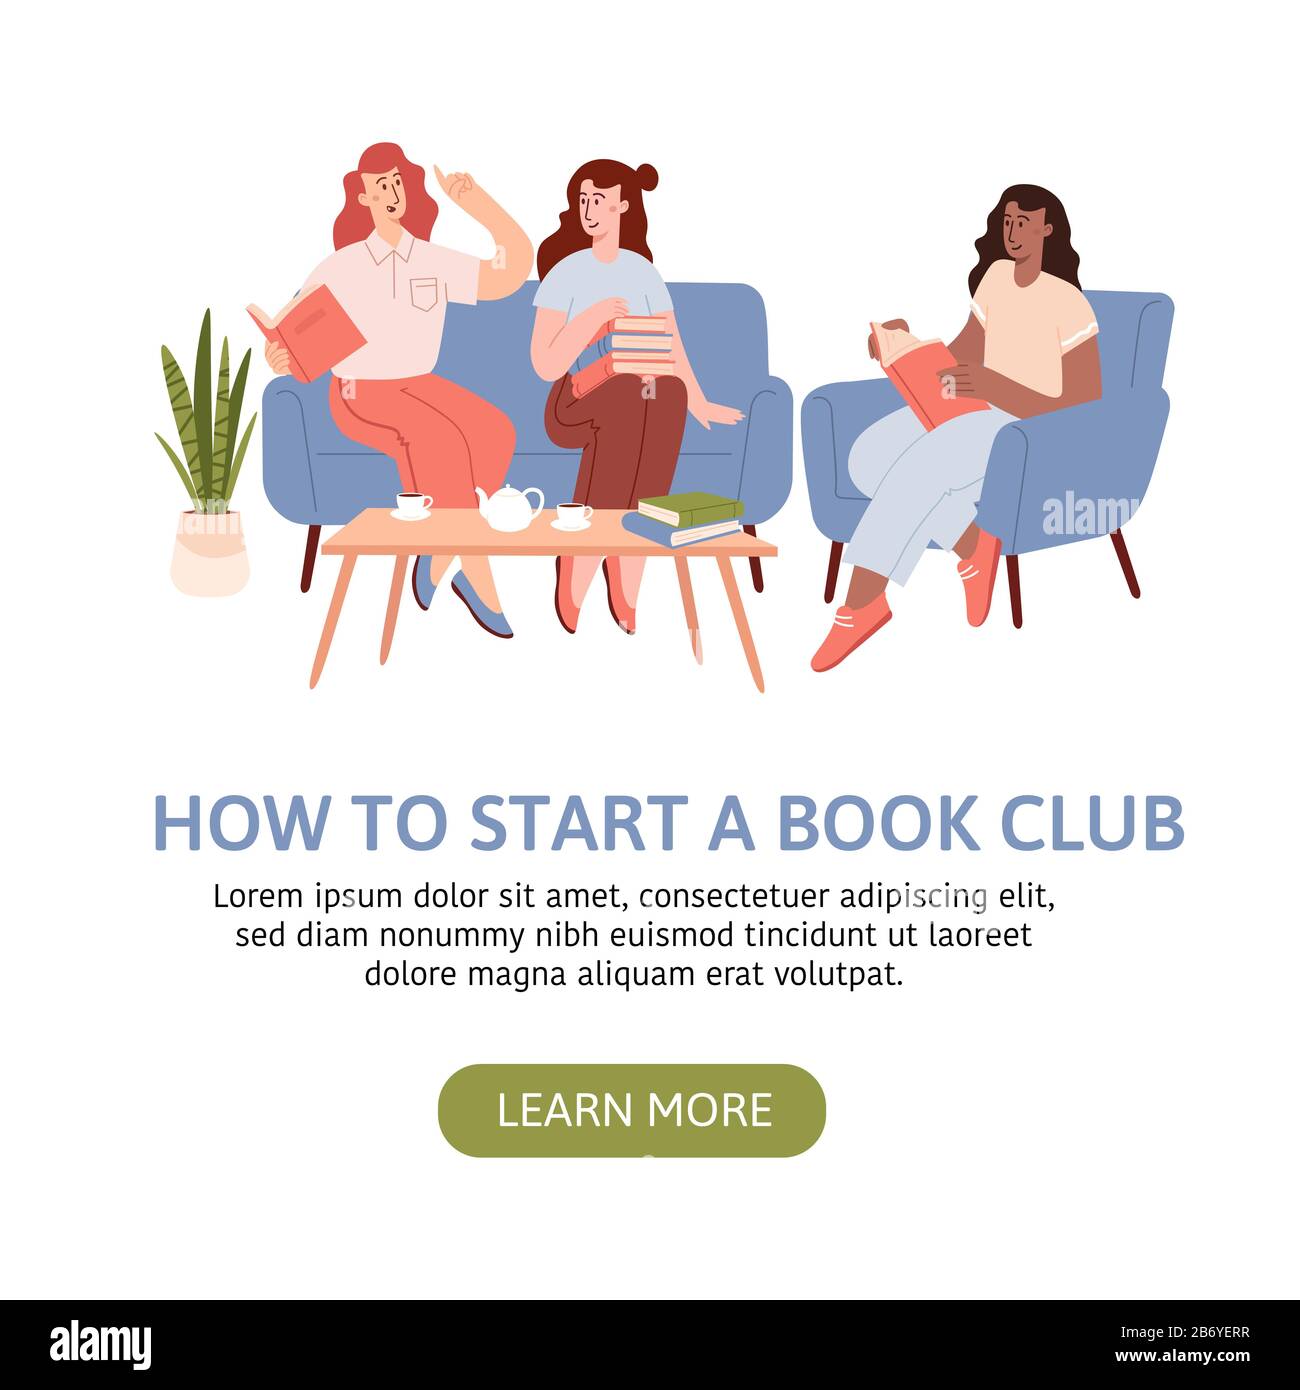 Landing page template good for library or reading book clubs, fan club of traditional reading, discussion groups Stock Vector